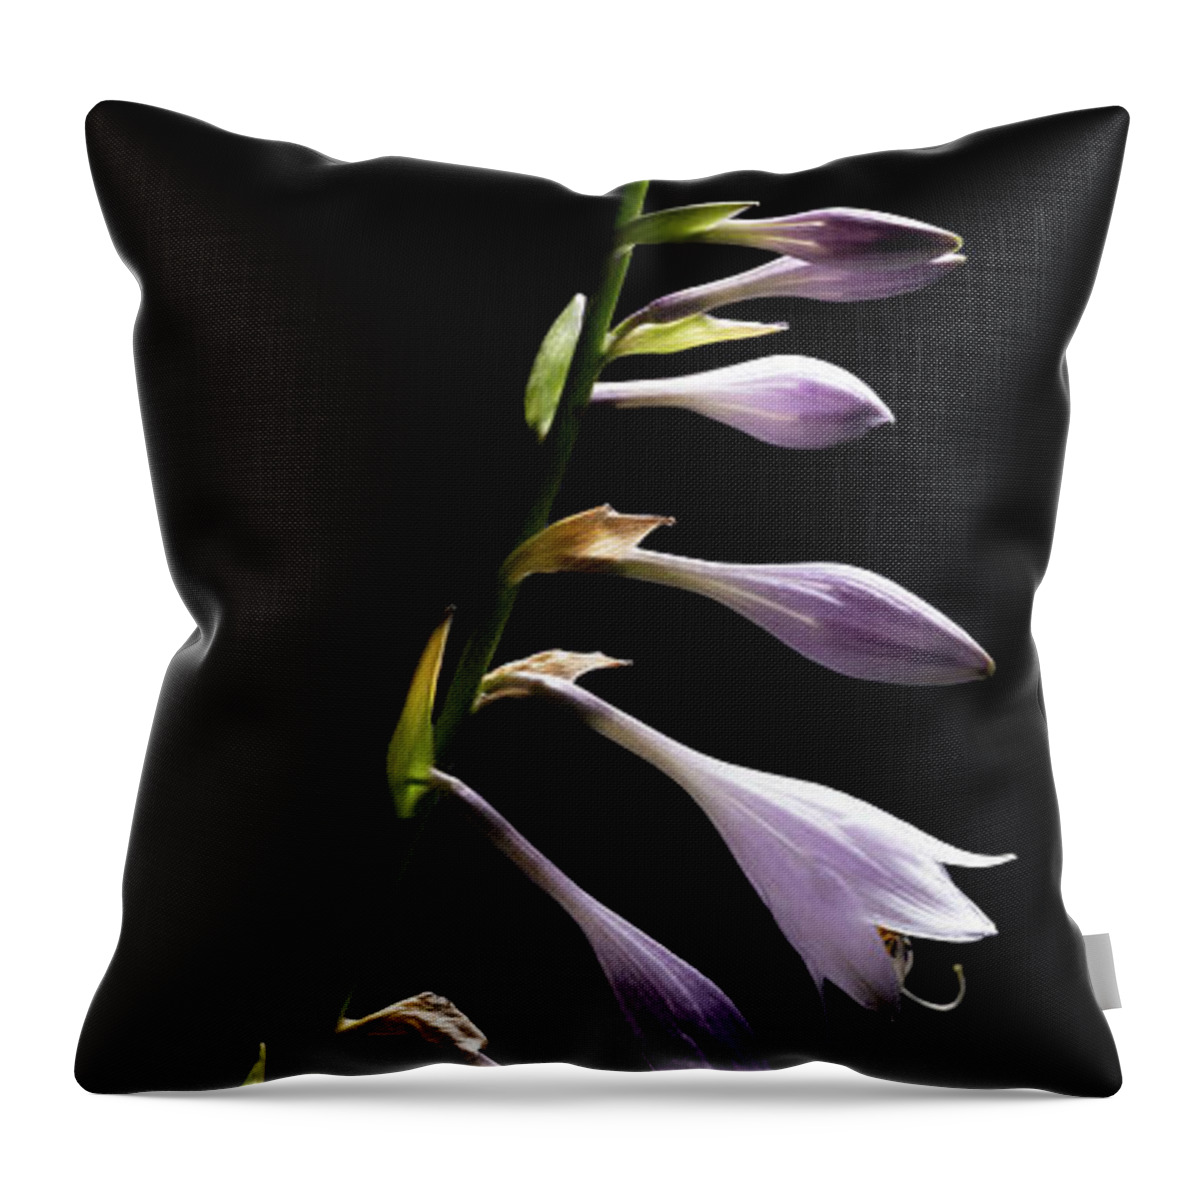 Blue Plantain Lily Throw Pillow featuring the photograph Blue Plantain Lily by Kevin Suttlehan